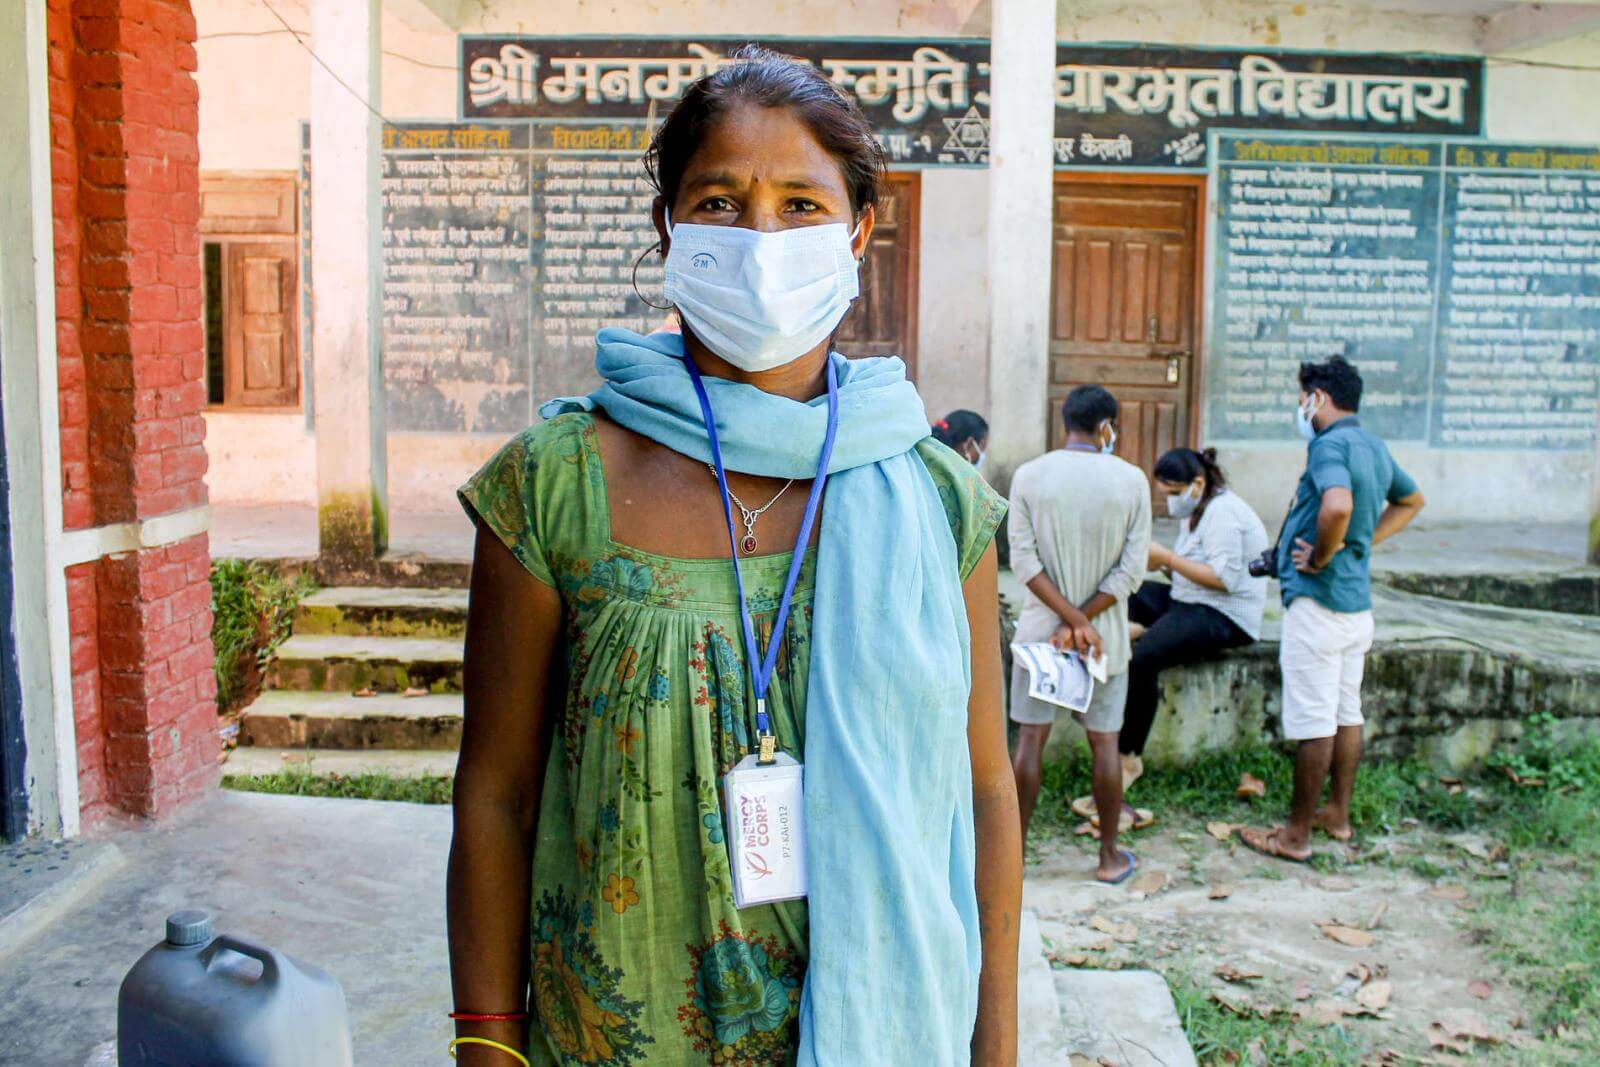 A Nepalese woman wearing a face mask